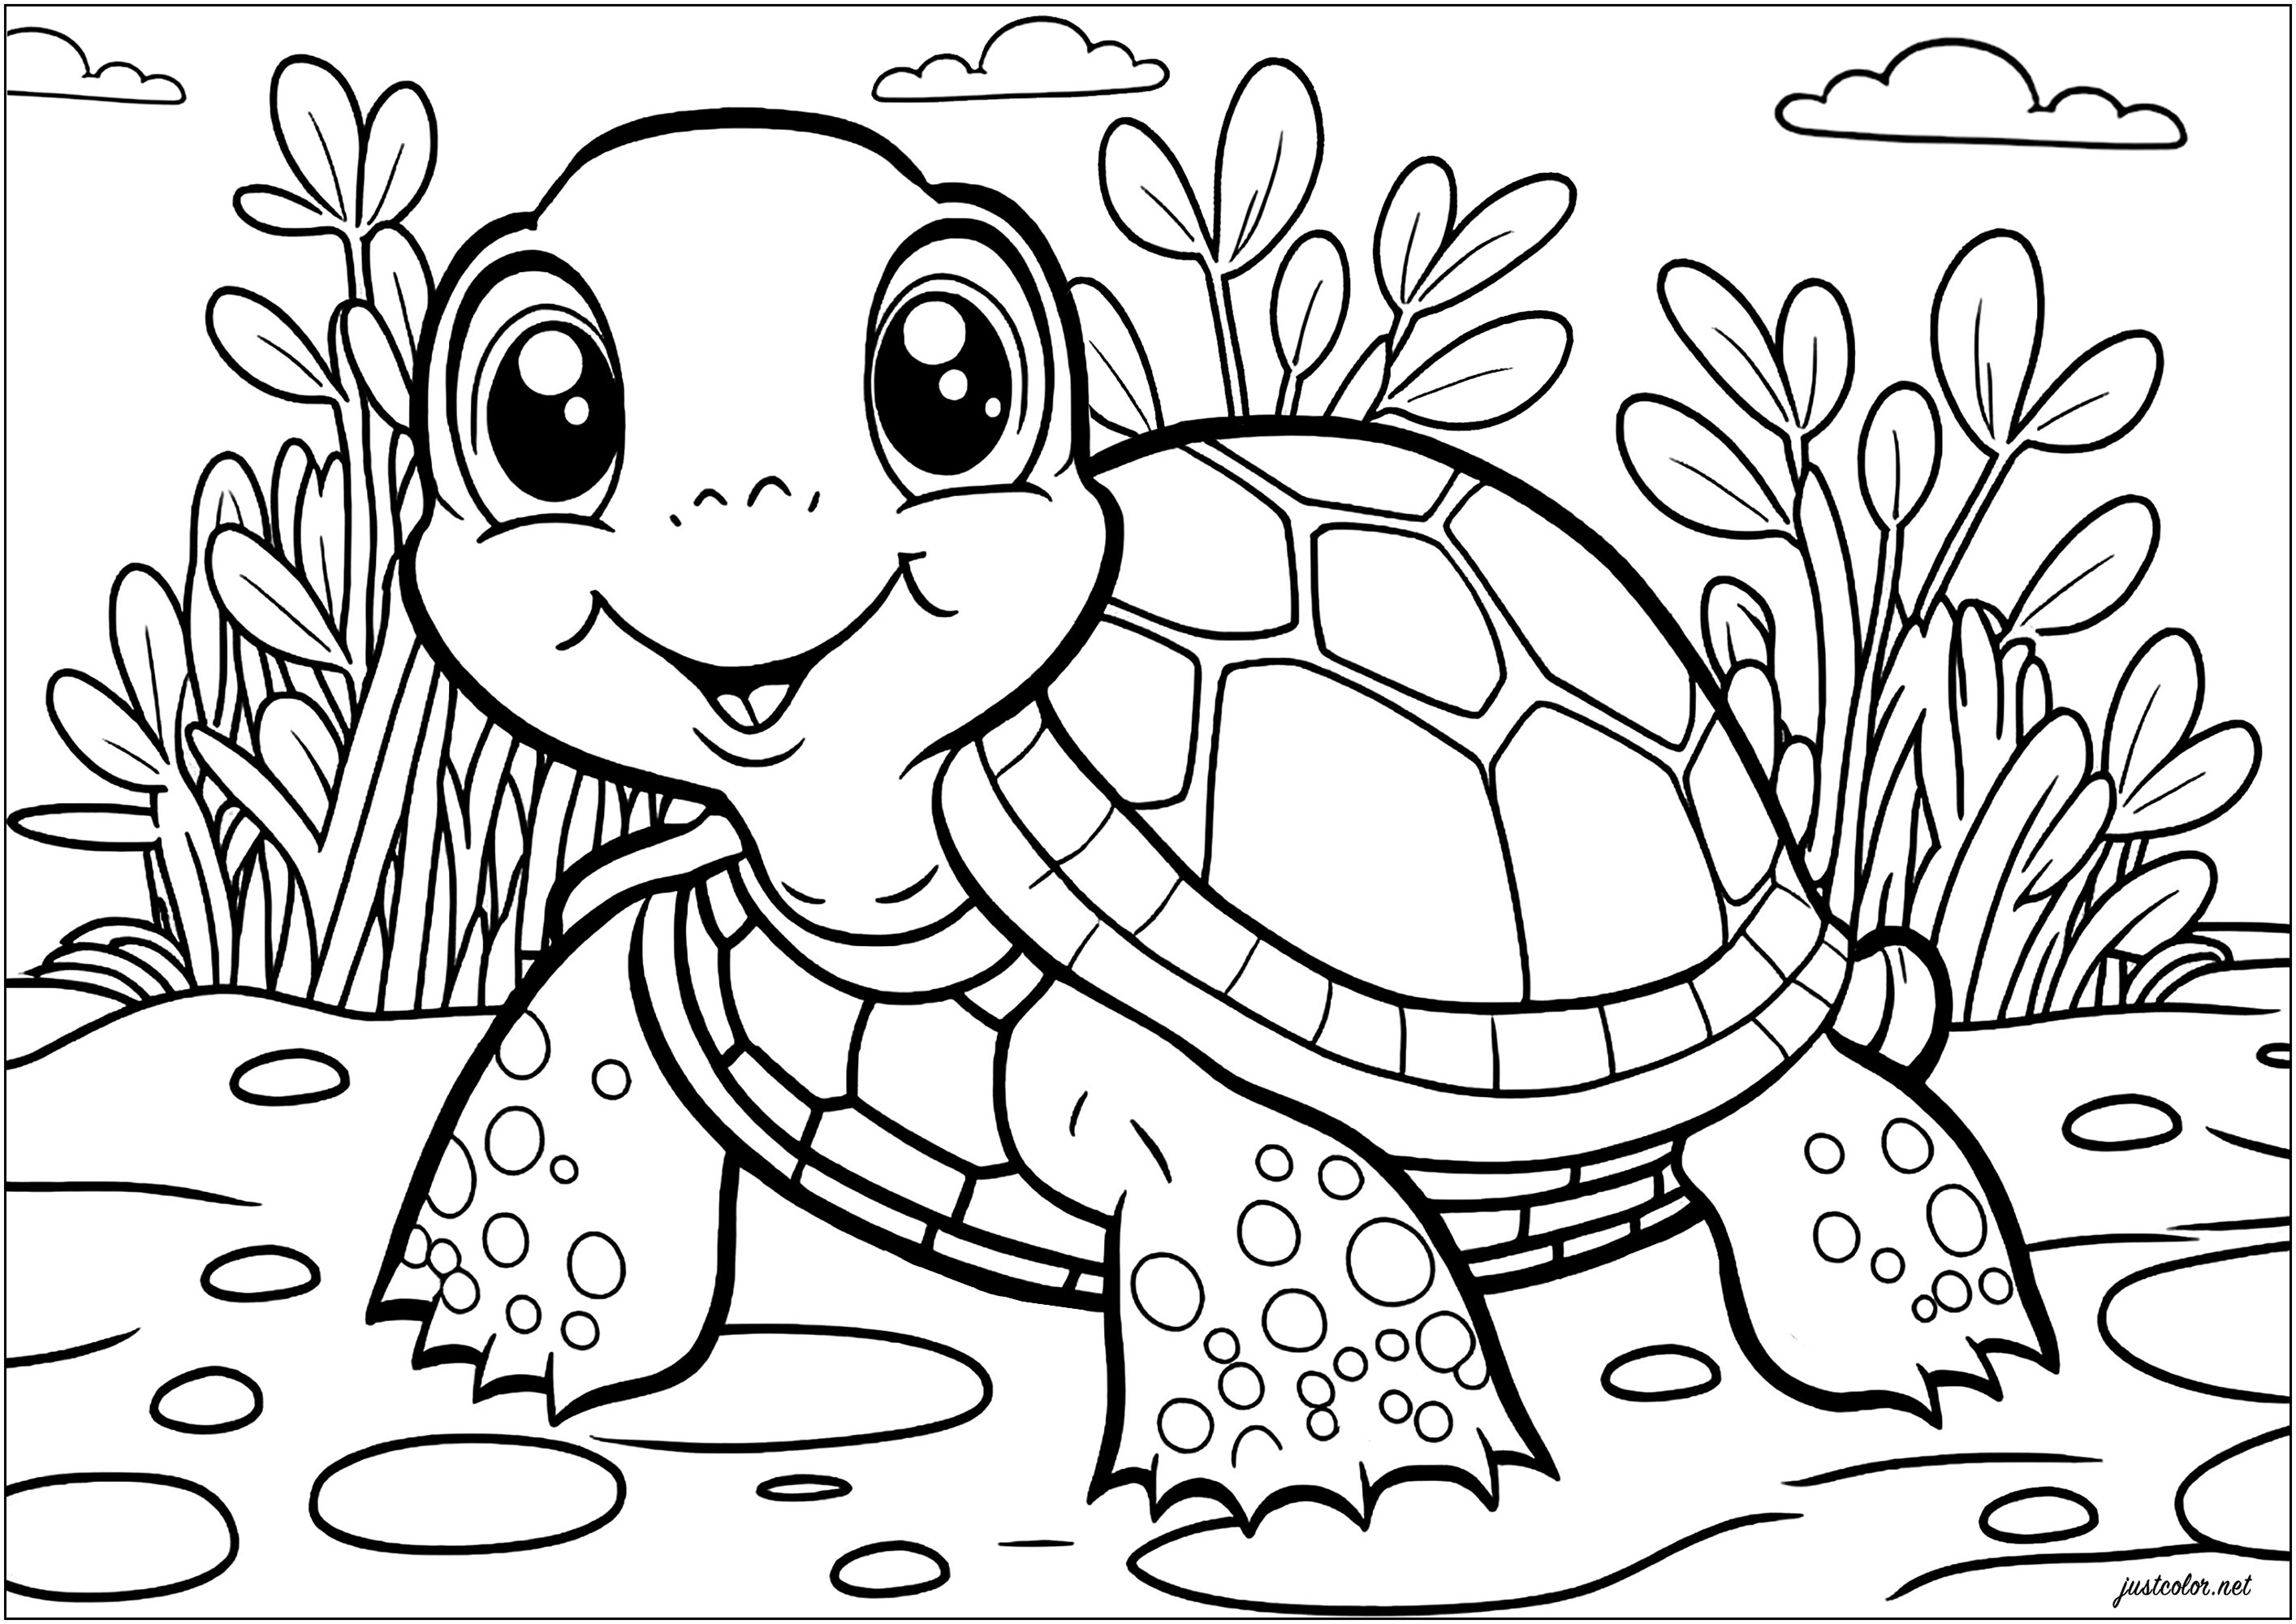 Simple turtle coloring. Draw the natural world around this turtle with your creativity and favourite colors.